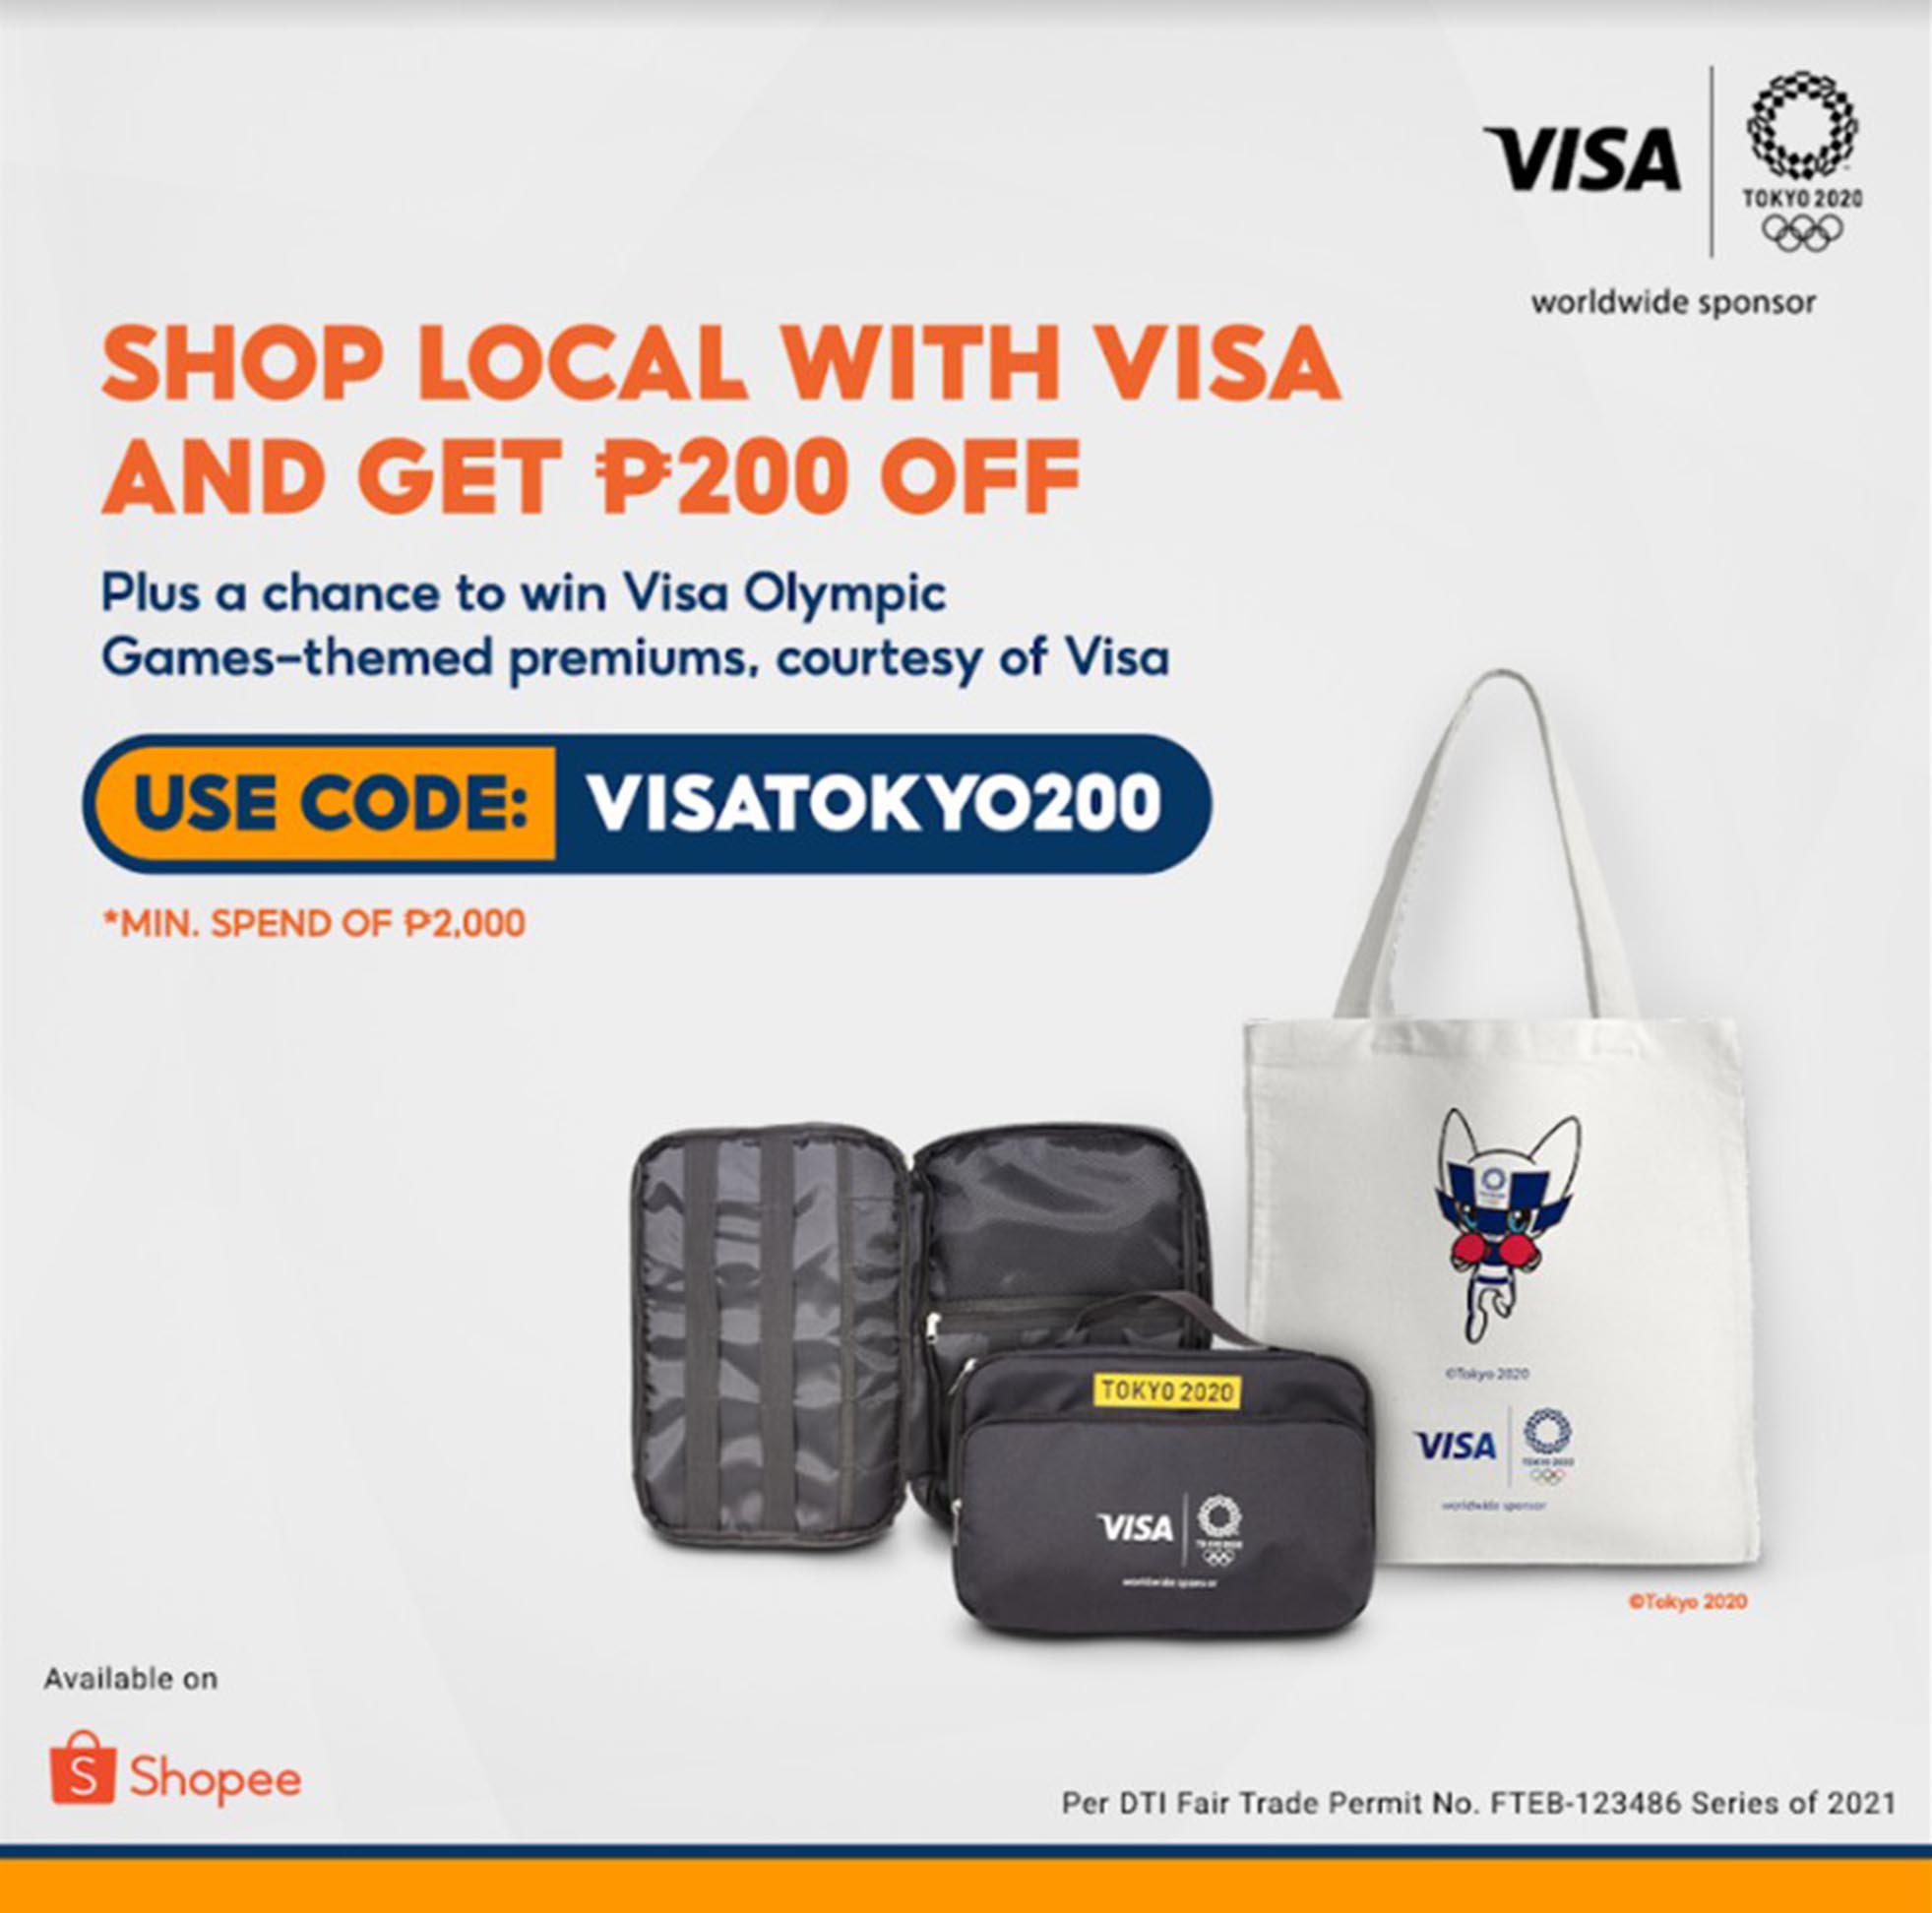 Visa’s Olympic Games Tokyo 2020 campaign for Shopee launches in the Philippines